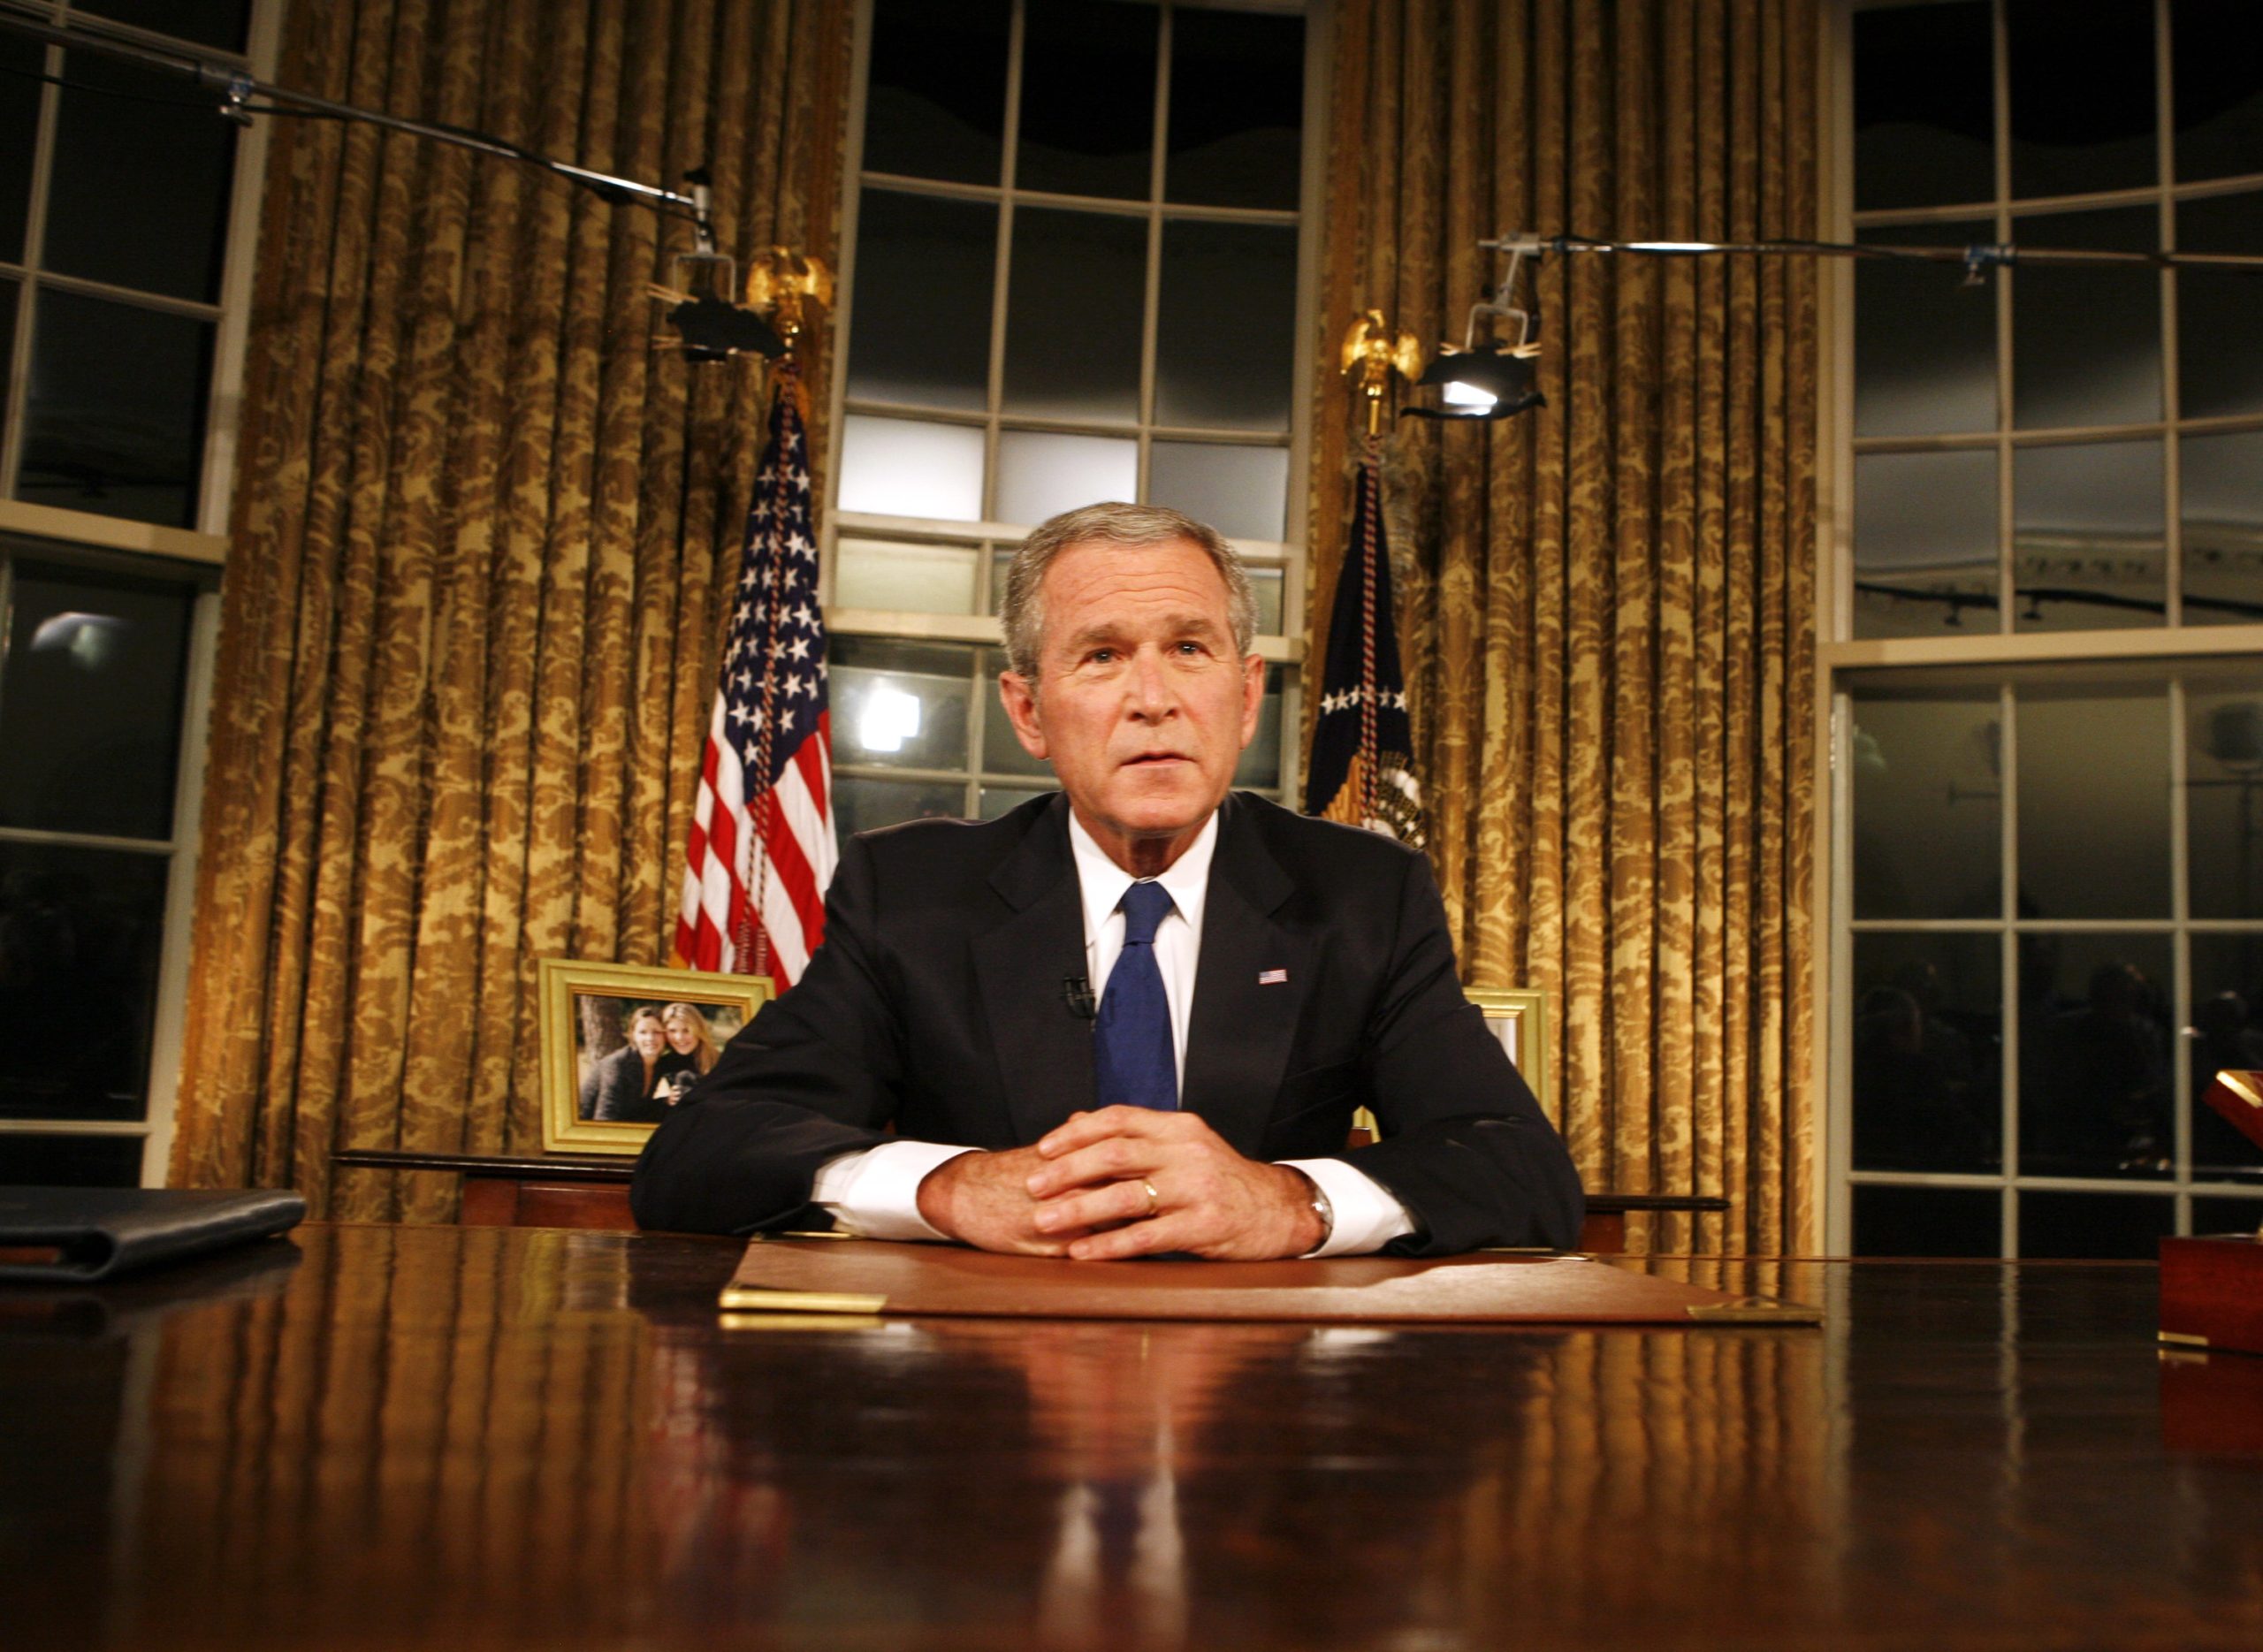 WASHINGTON - SEPTEMBER 13: (AFP OUT) President George W. Bush poses for photographers after addressing the nation on the military and political situation in Iraq from the White House September 13, 2007 in Washington, DC. (Aude Guerrucci-Pool/Getty Images)